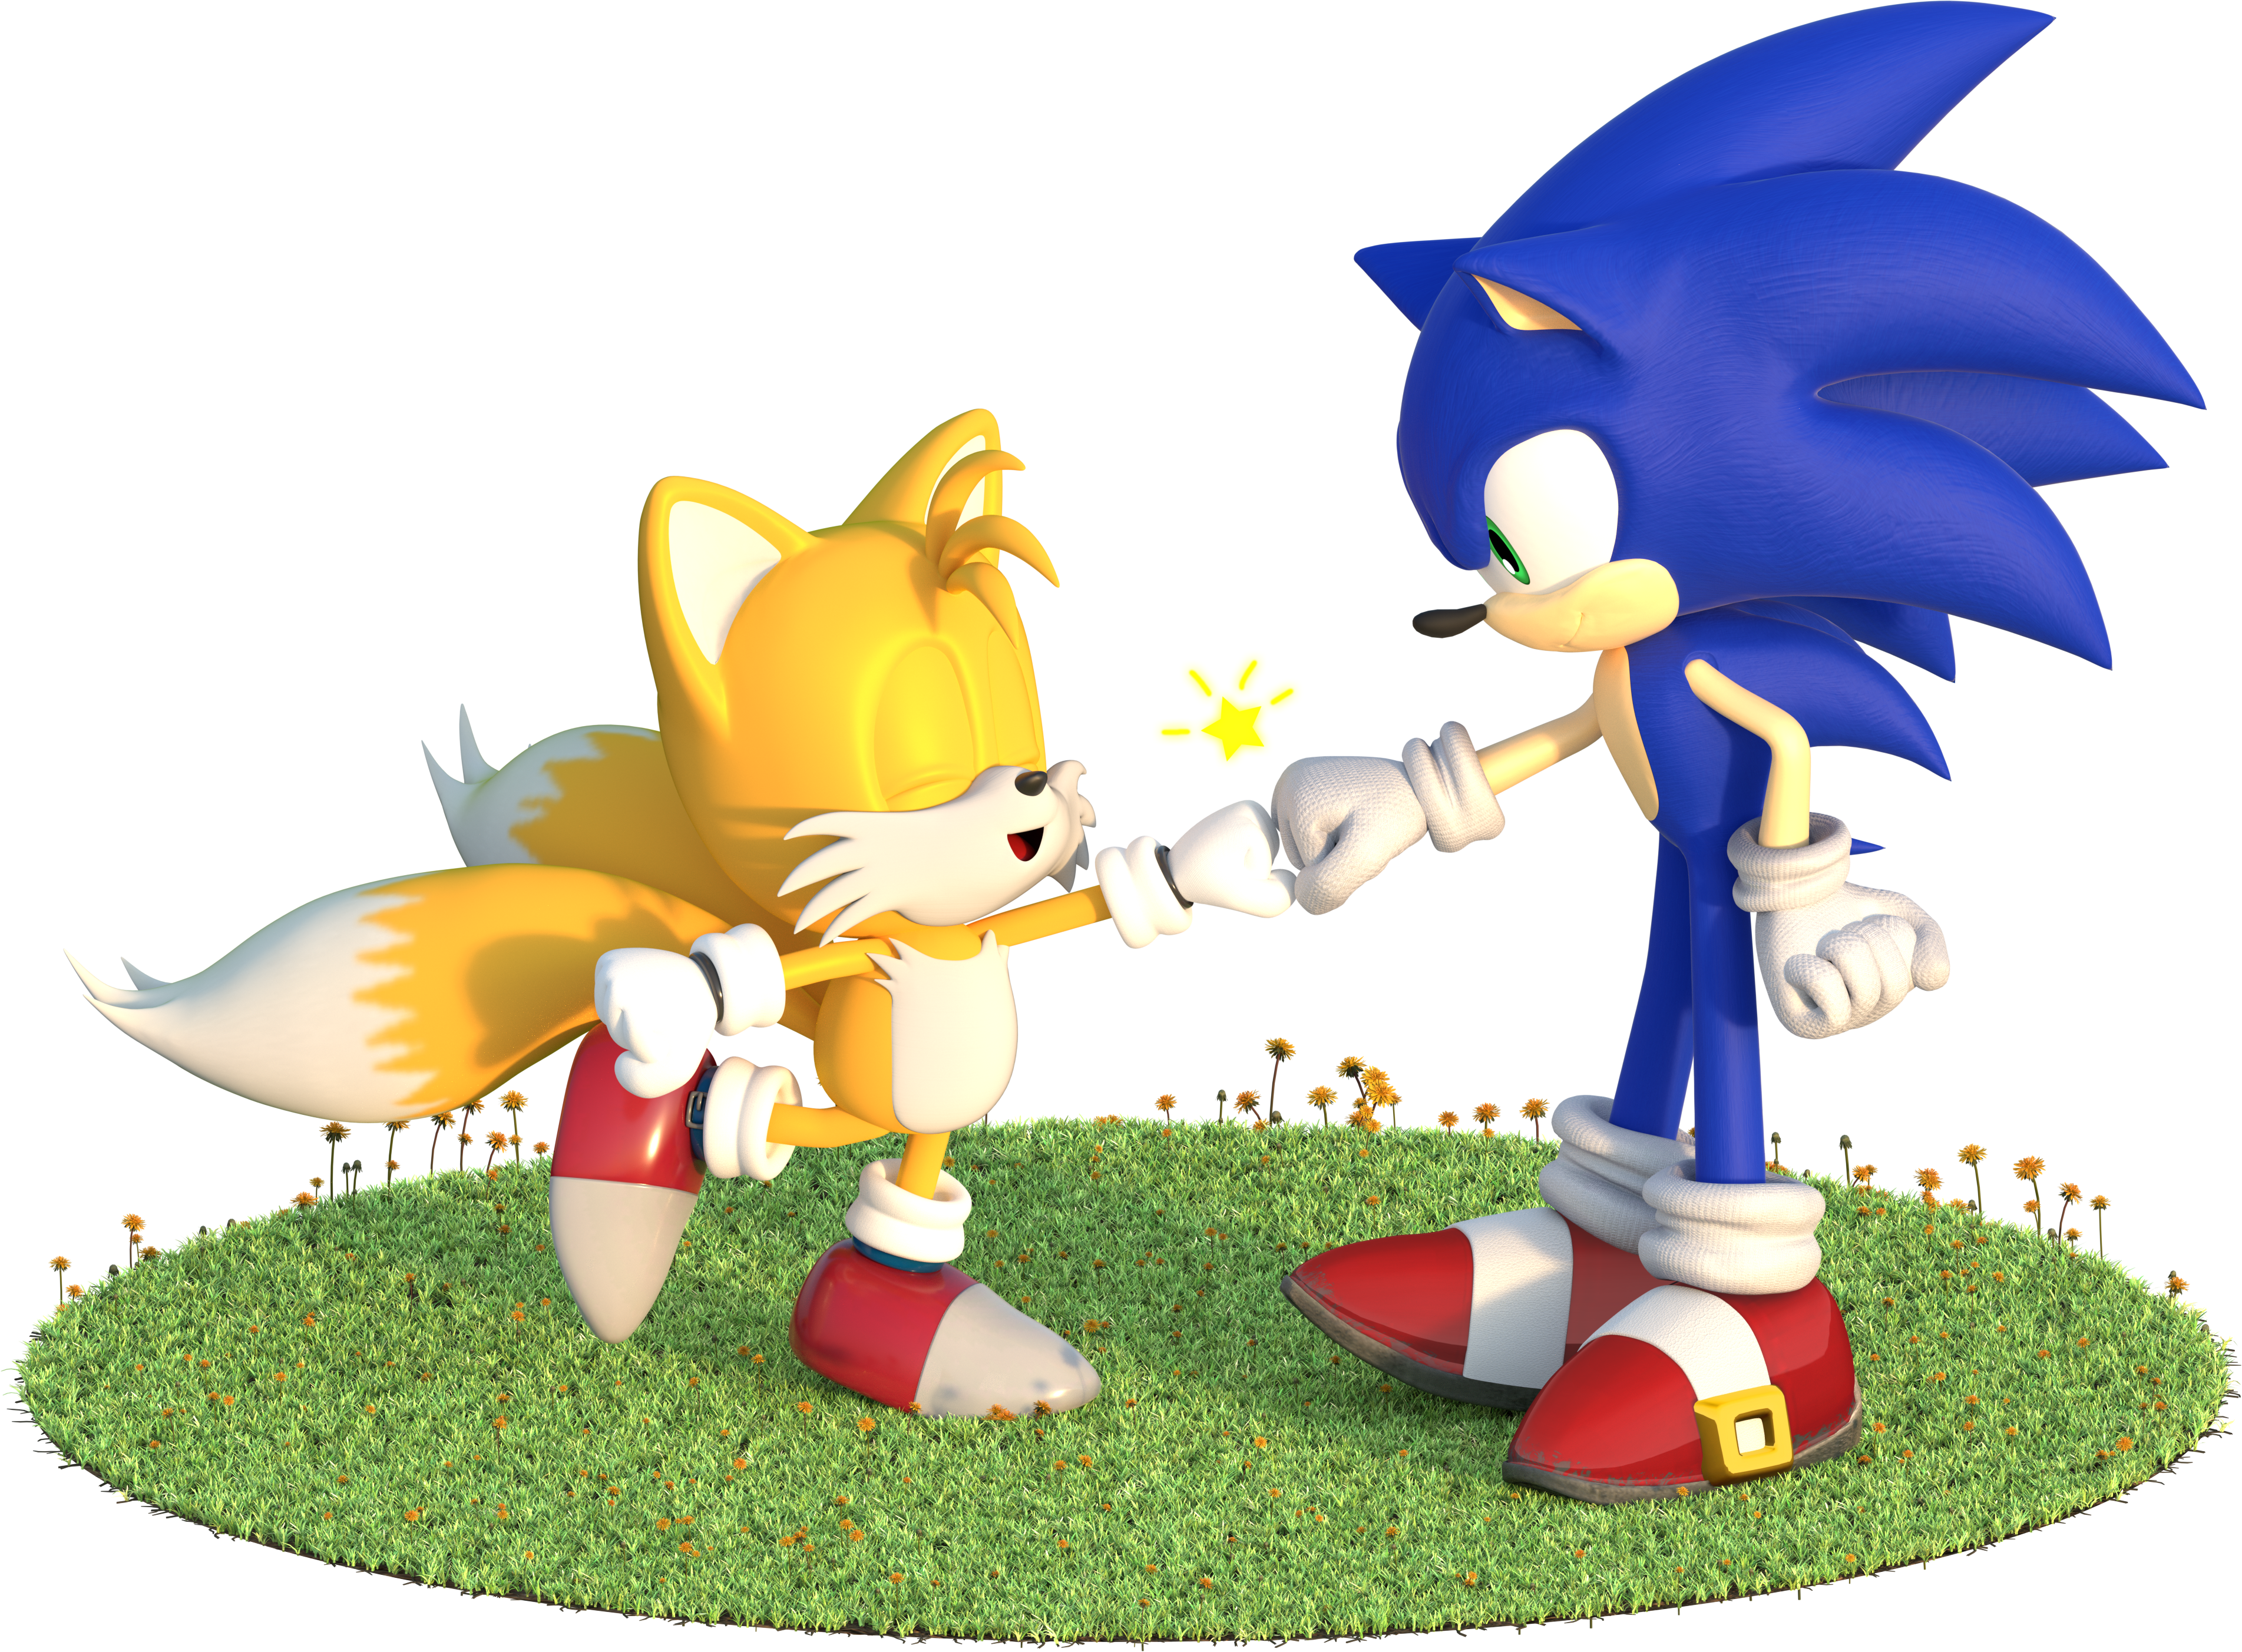 Here's A Cute Fist Bump Between Sonic And Classic Tails - Here's A Cute Fist Bump Between Sonic And Classic Tails (3806x2805)